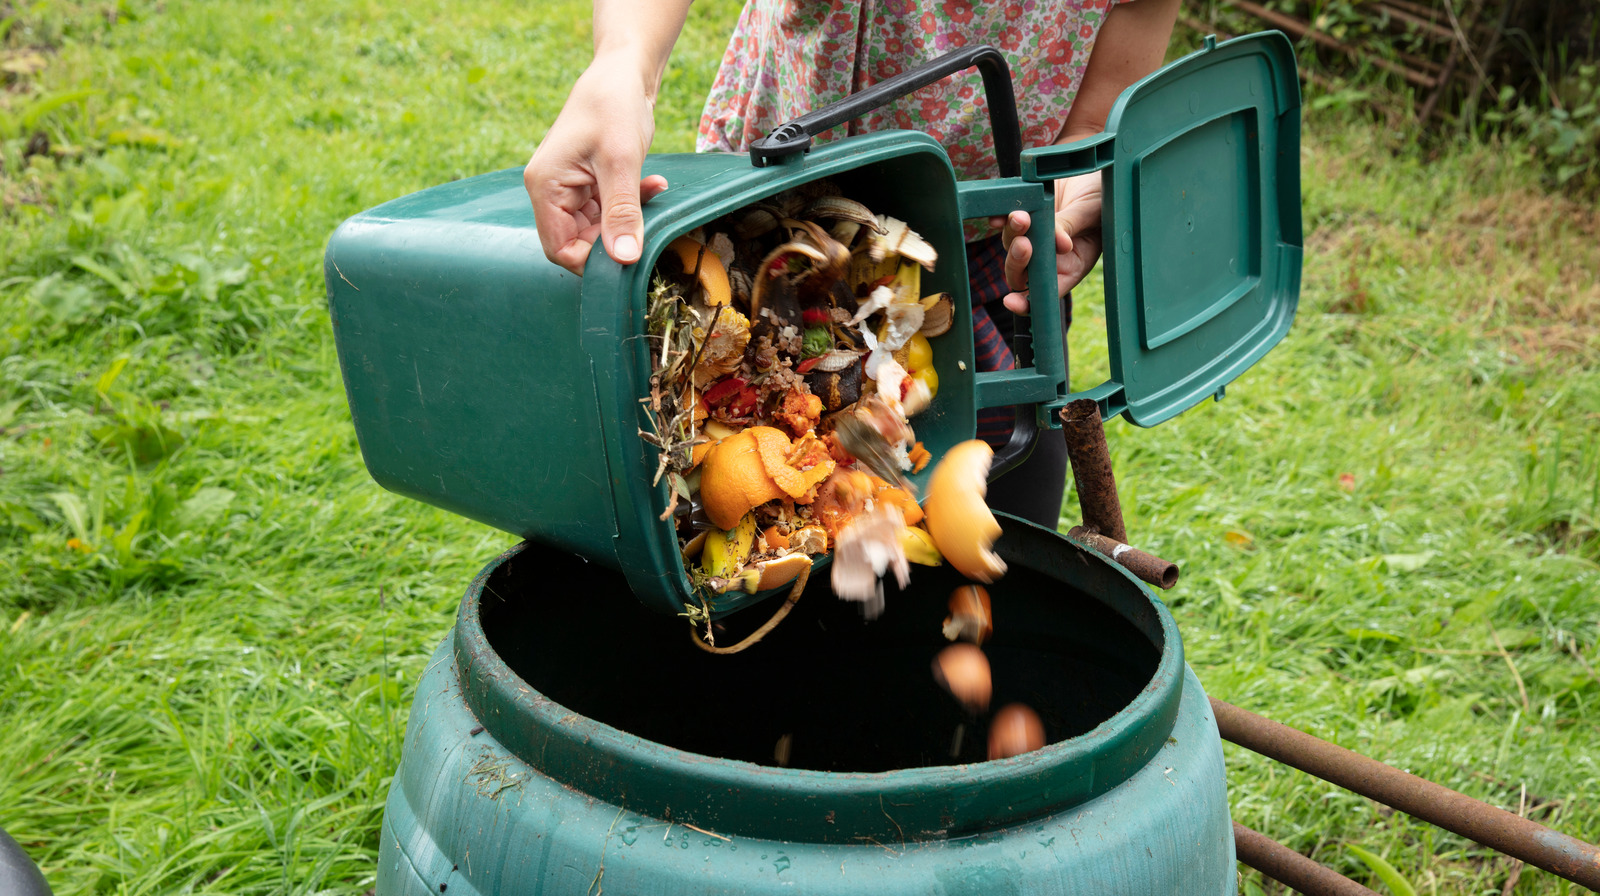 Person composting food scraps outdoors.